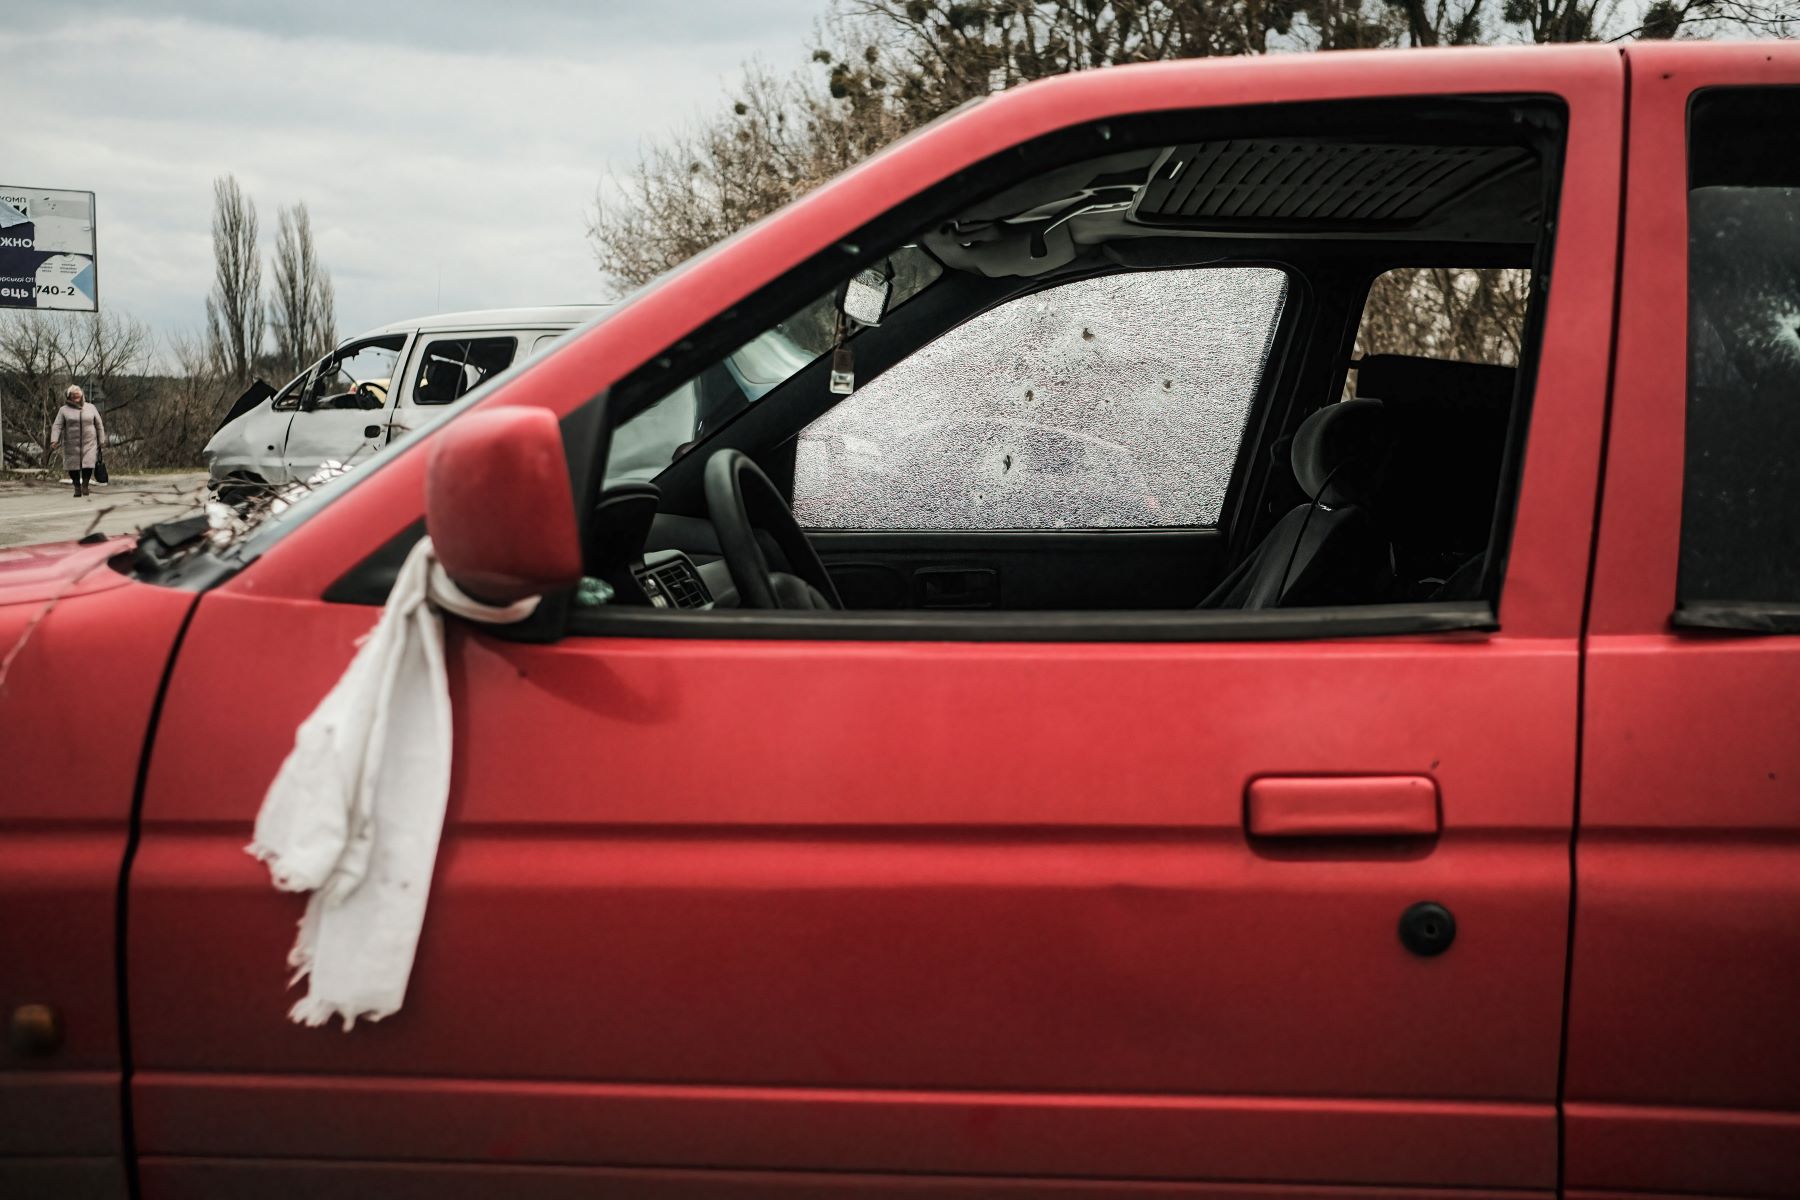 An abandoned car riddled with bullet holes with a white towel tied around the driver's side mirror